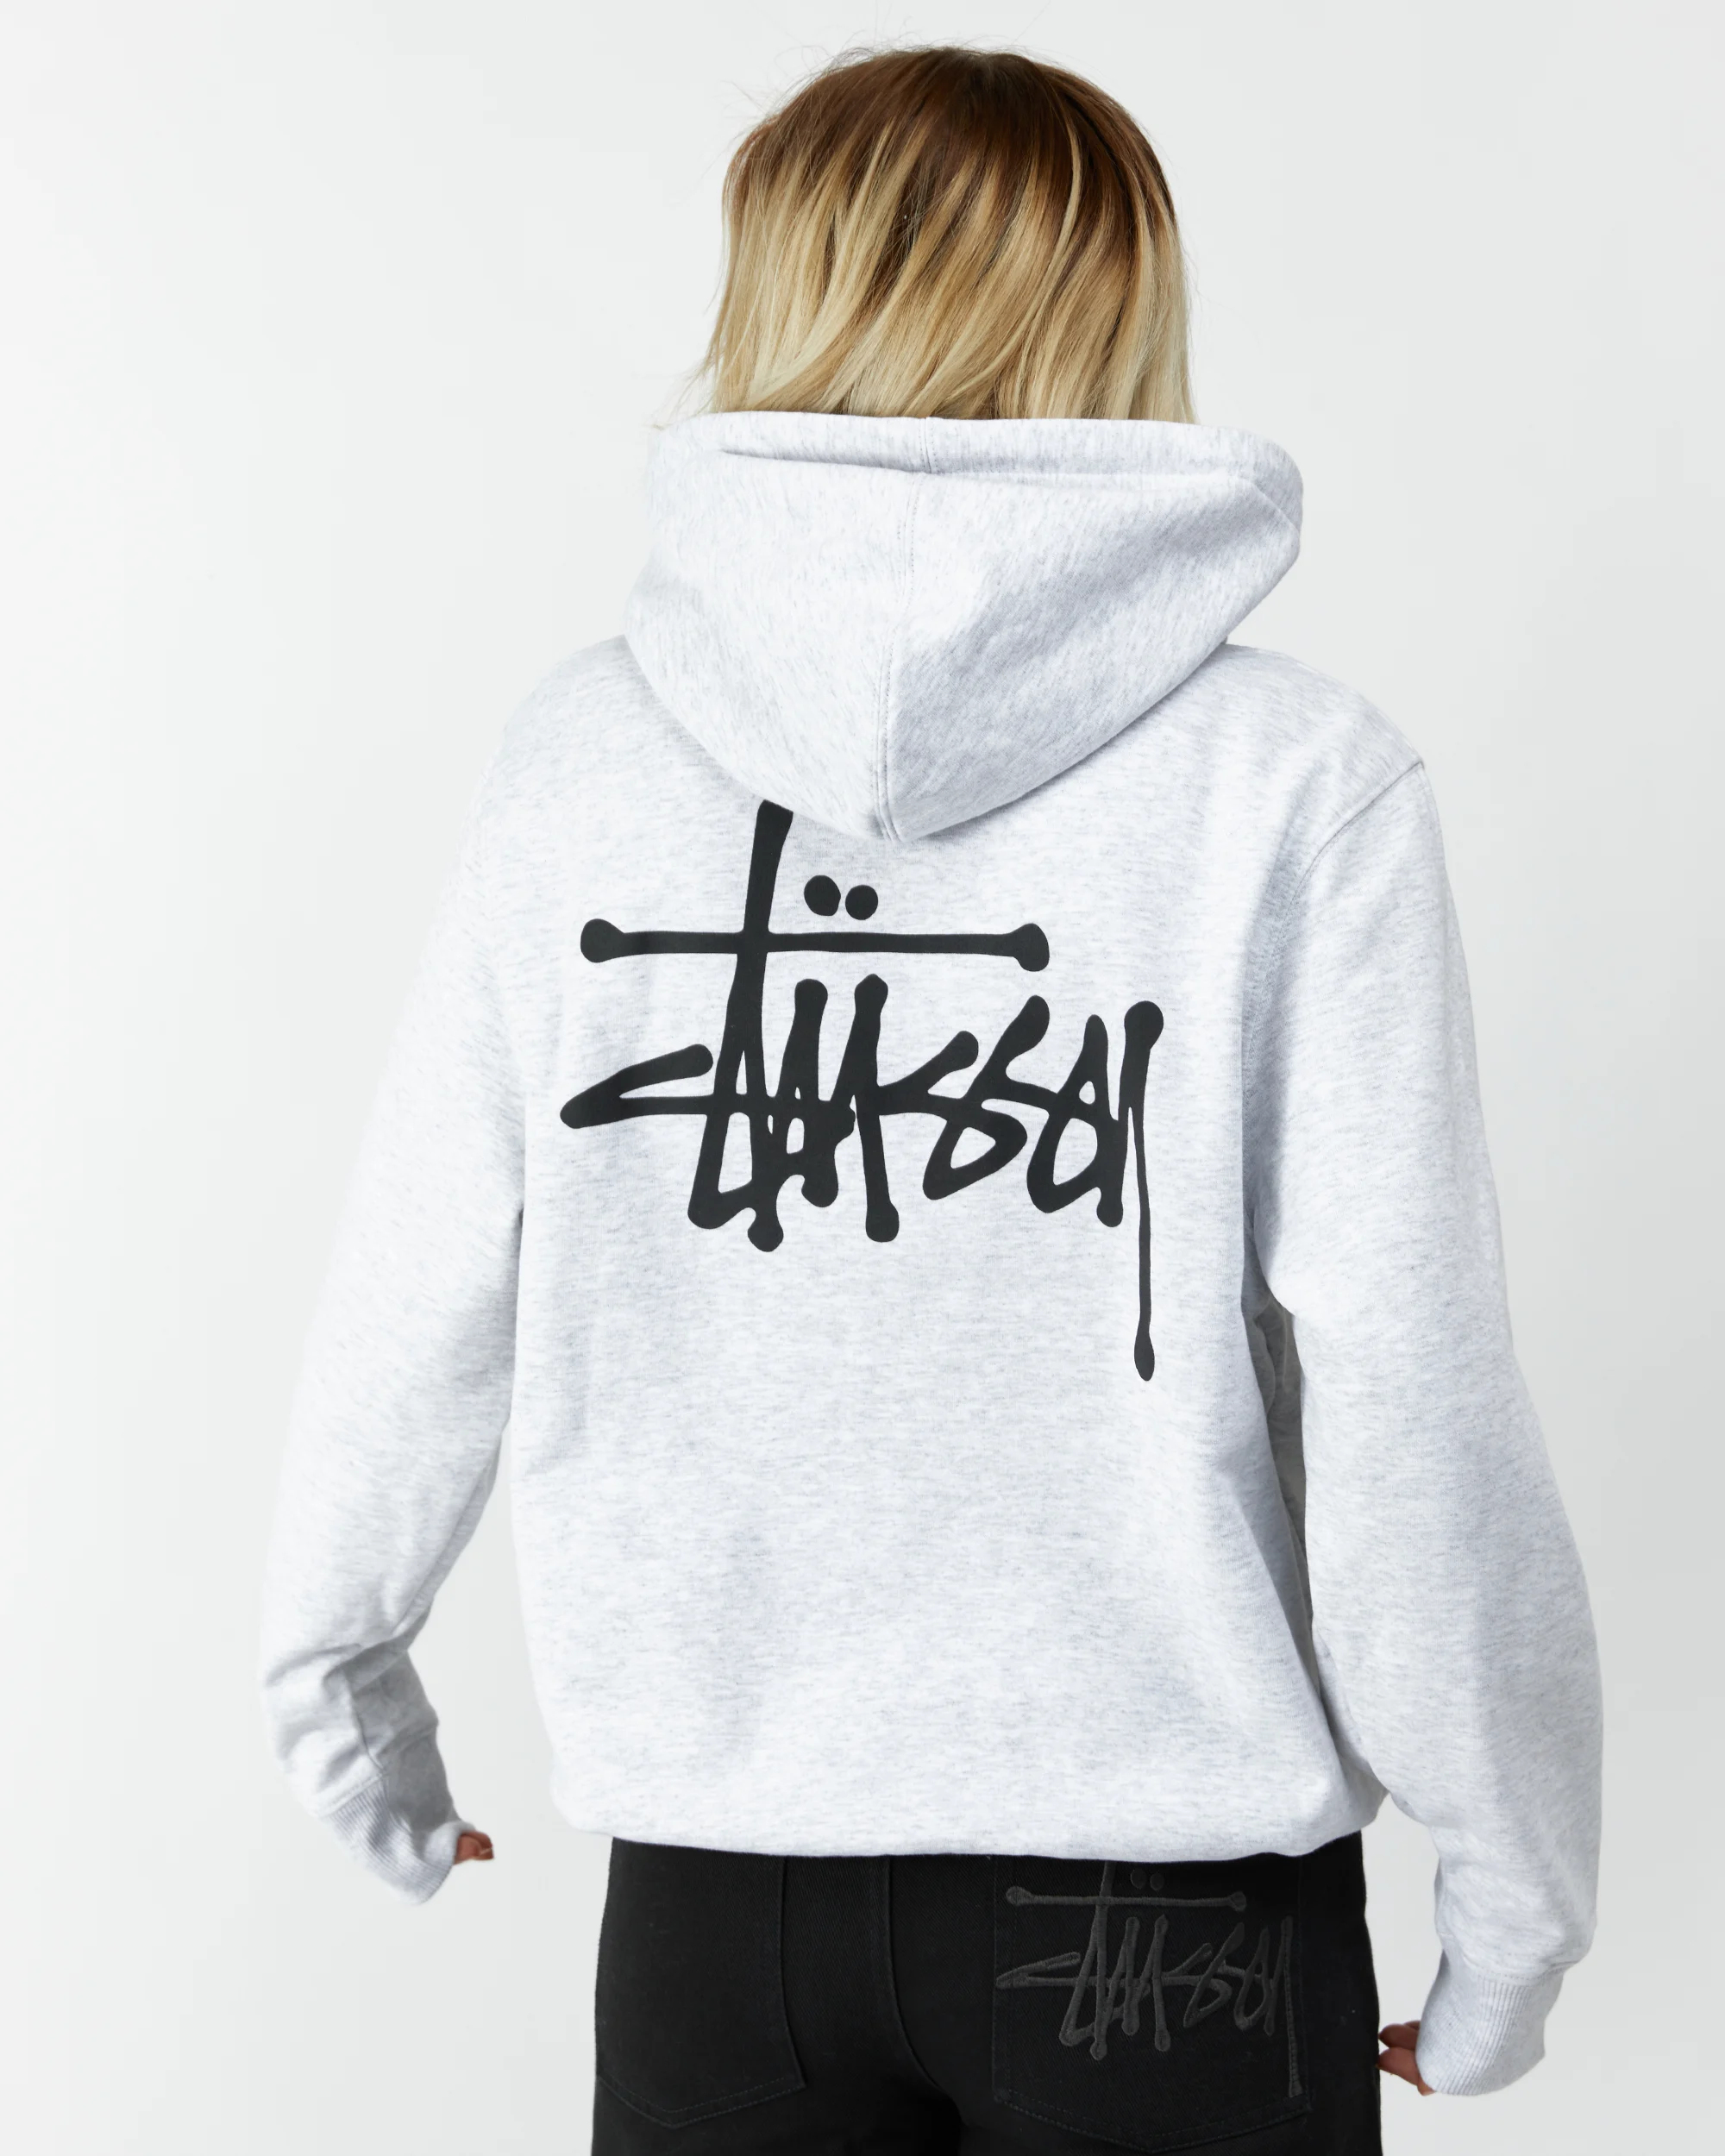 Which stussy clothing is best for winter?